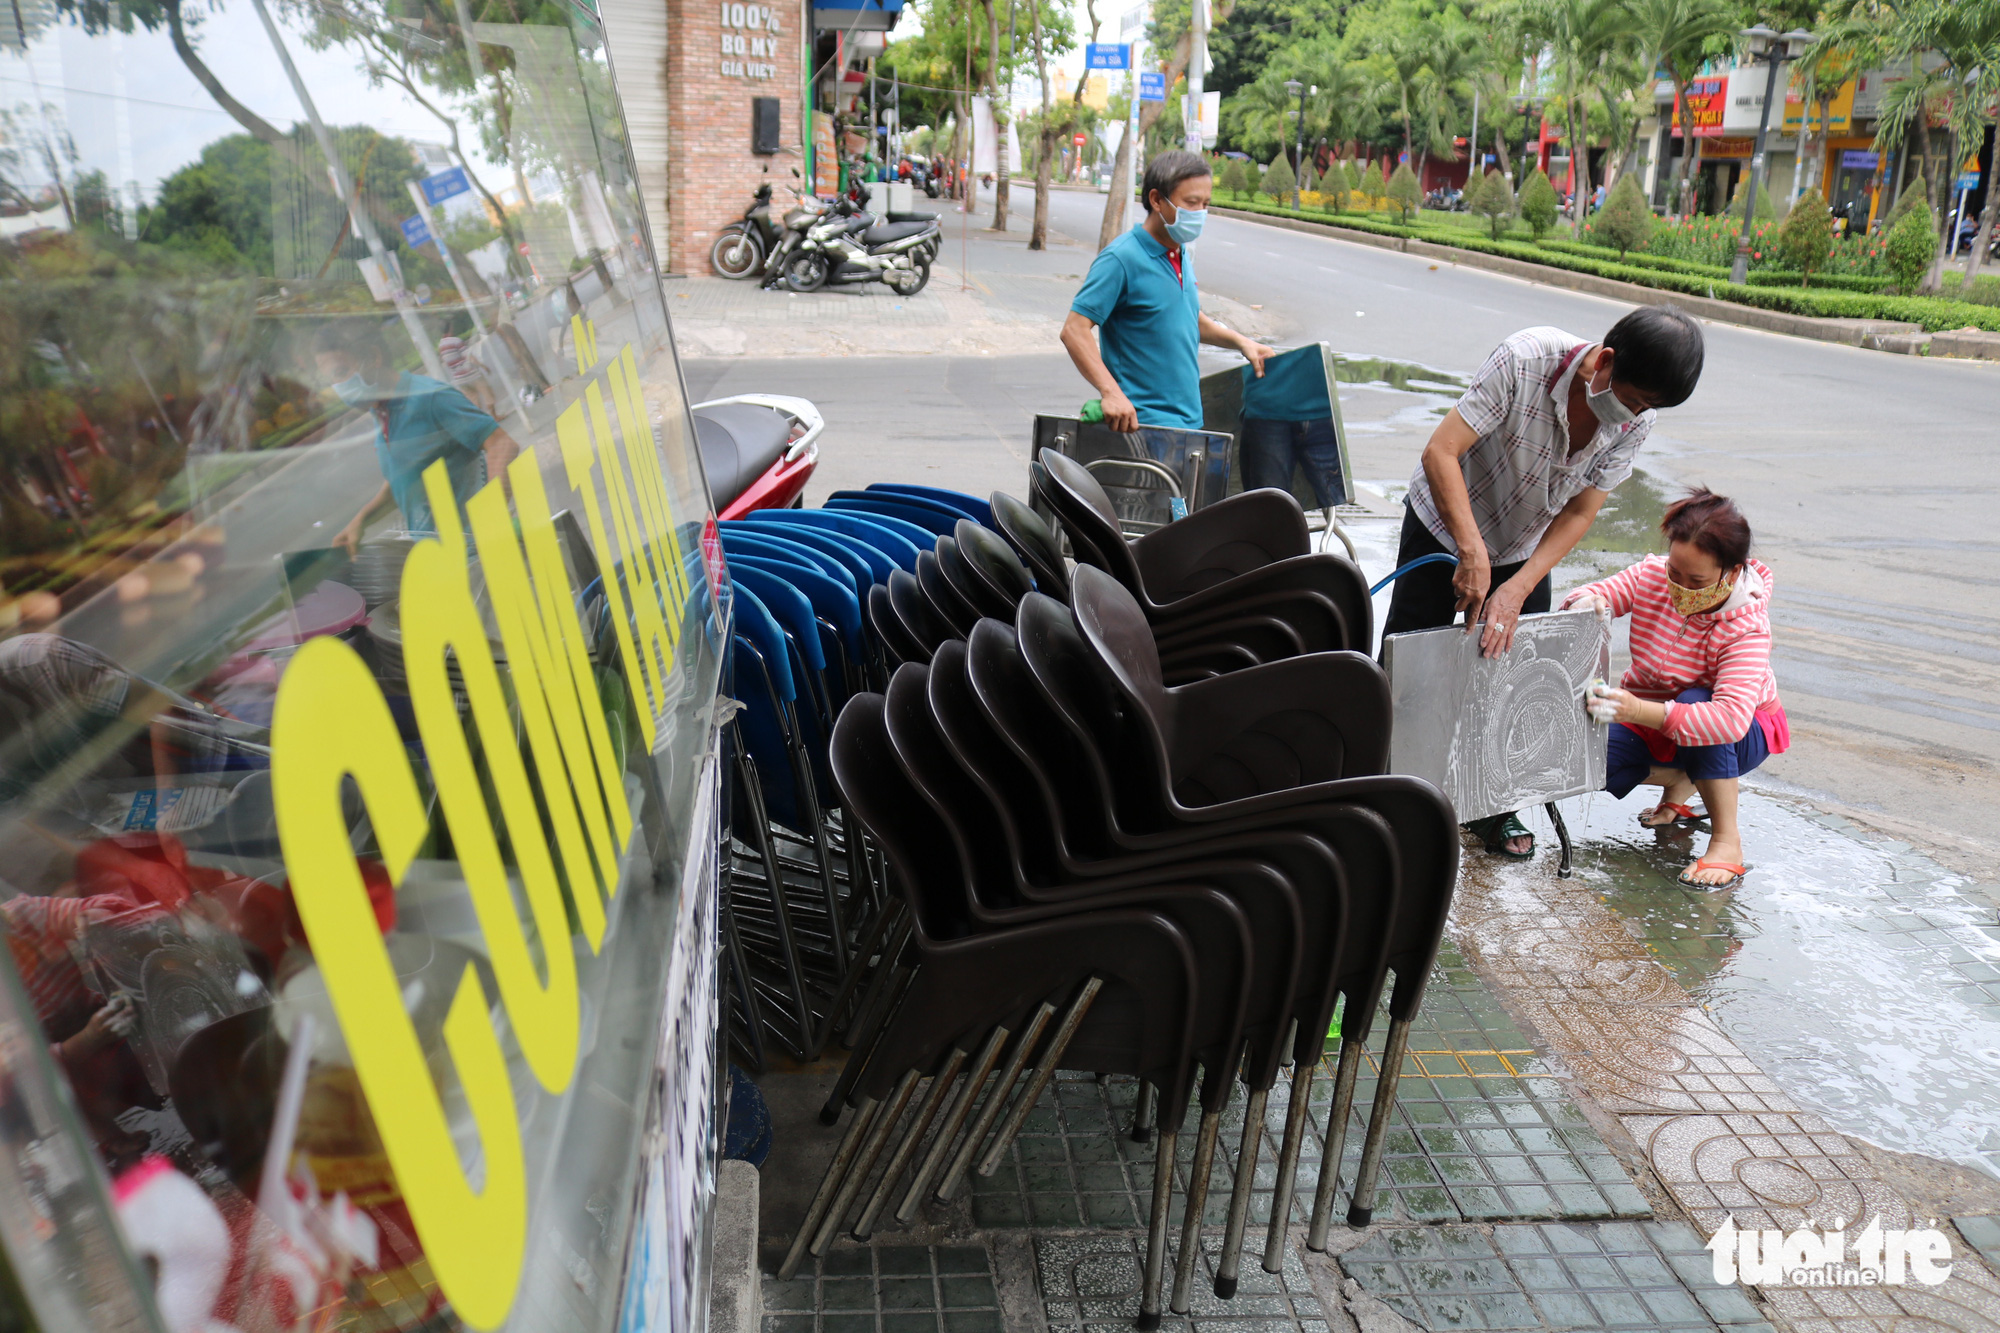 Eatery owner Vu Kham and his relatives clean furniture and tableware in preparation for the reopening of their business after the announcement of eased social distancing measures in Ho Chi Minh City, Vietnam, April 22, 2020. Photo: Ngoc Phuong / Tuoi Tre